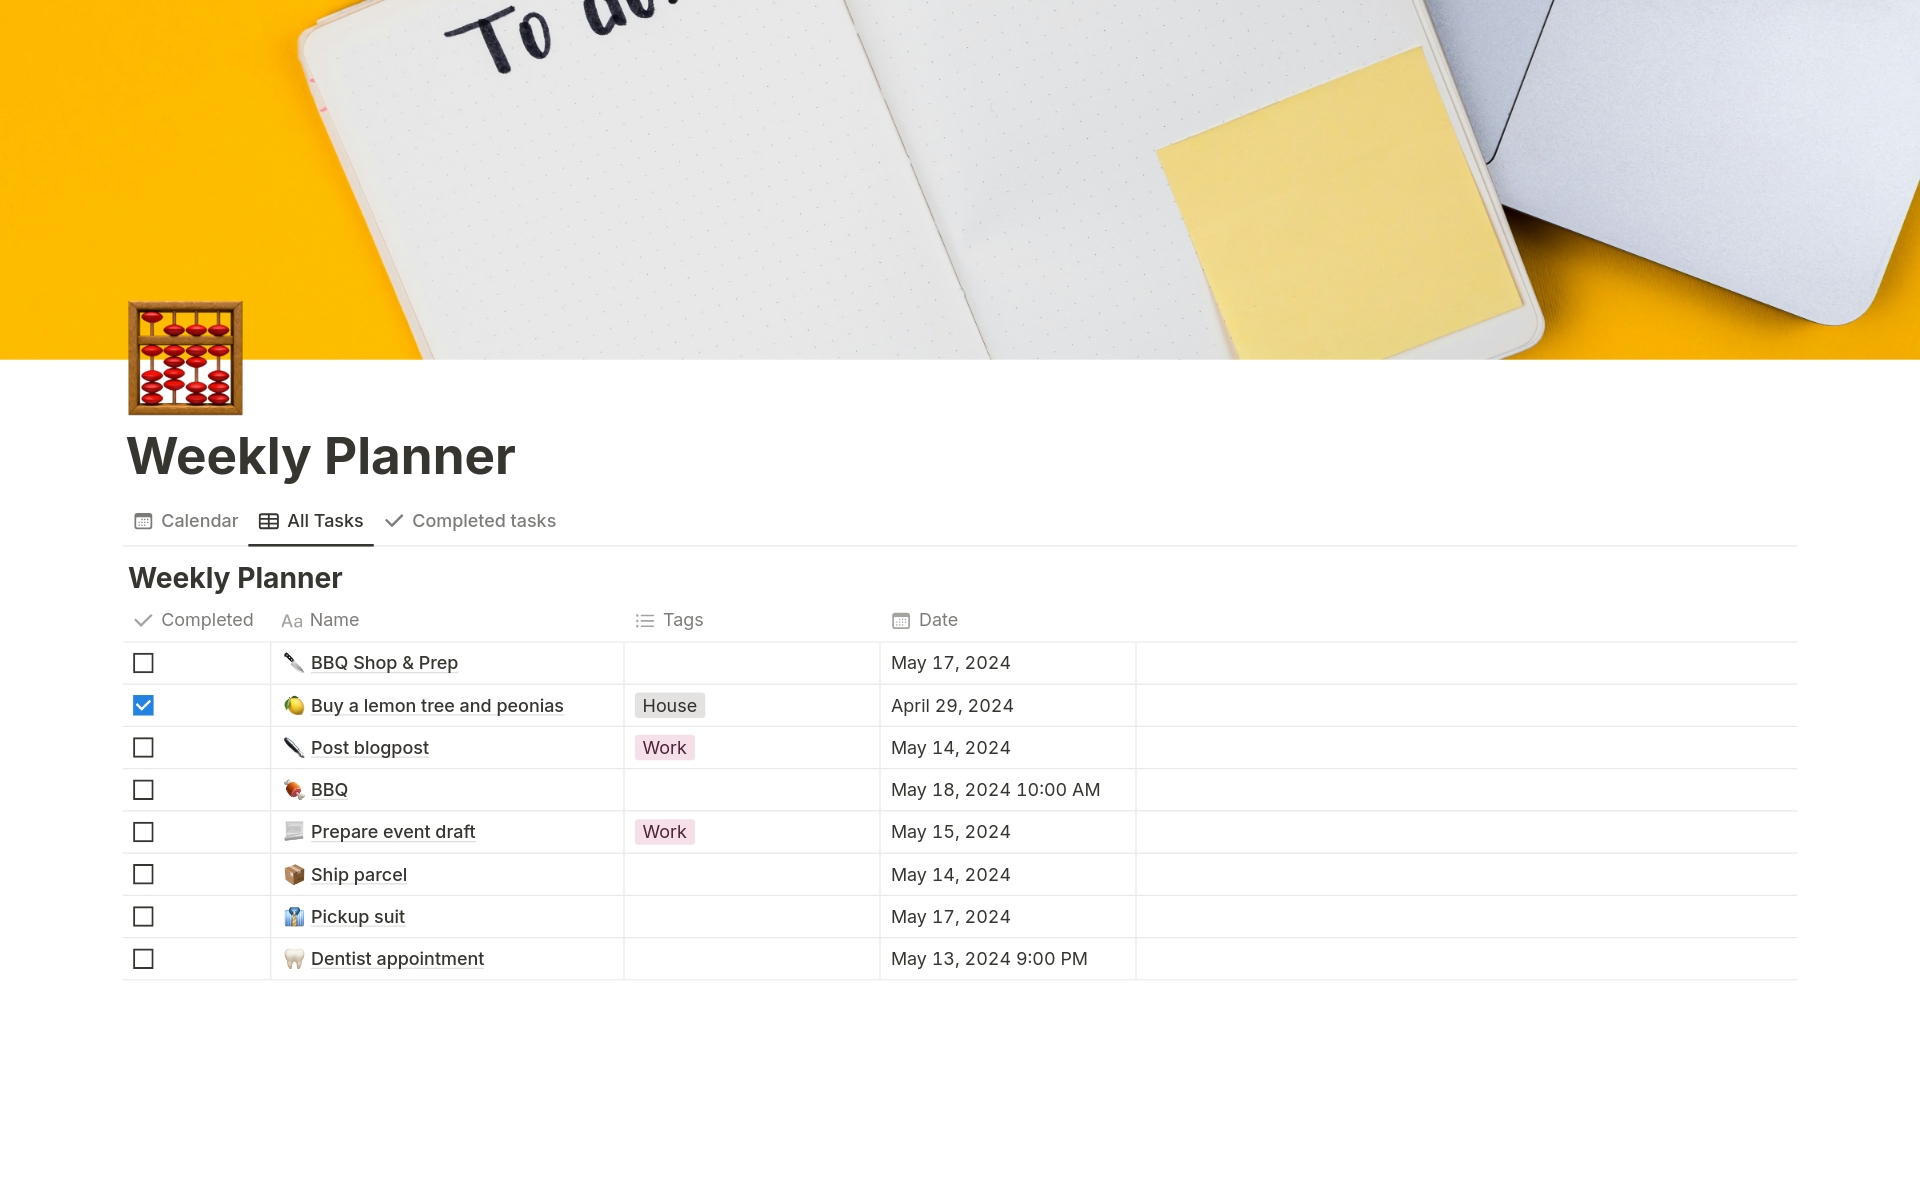 A comprehensive weekly planner template for organizing tasks and appointments with an integrated calendar.
